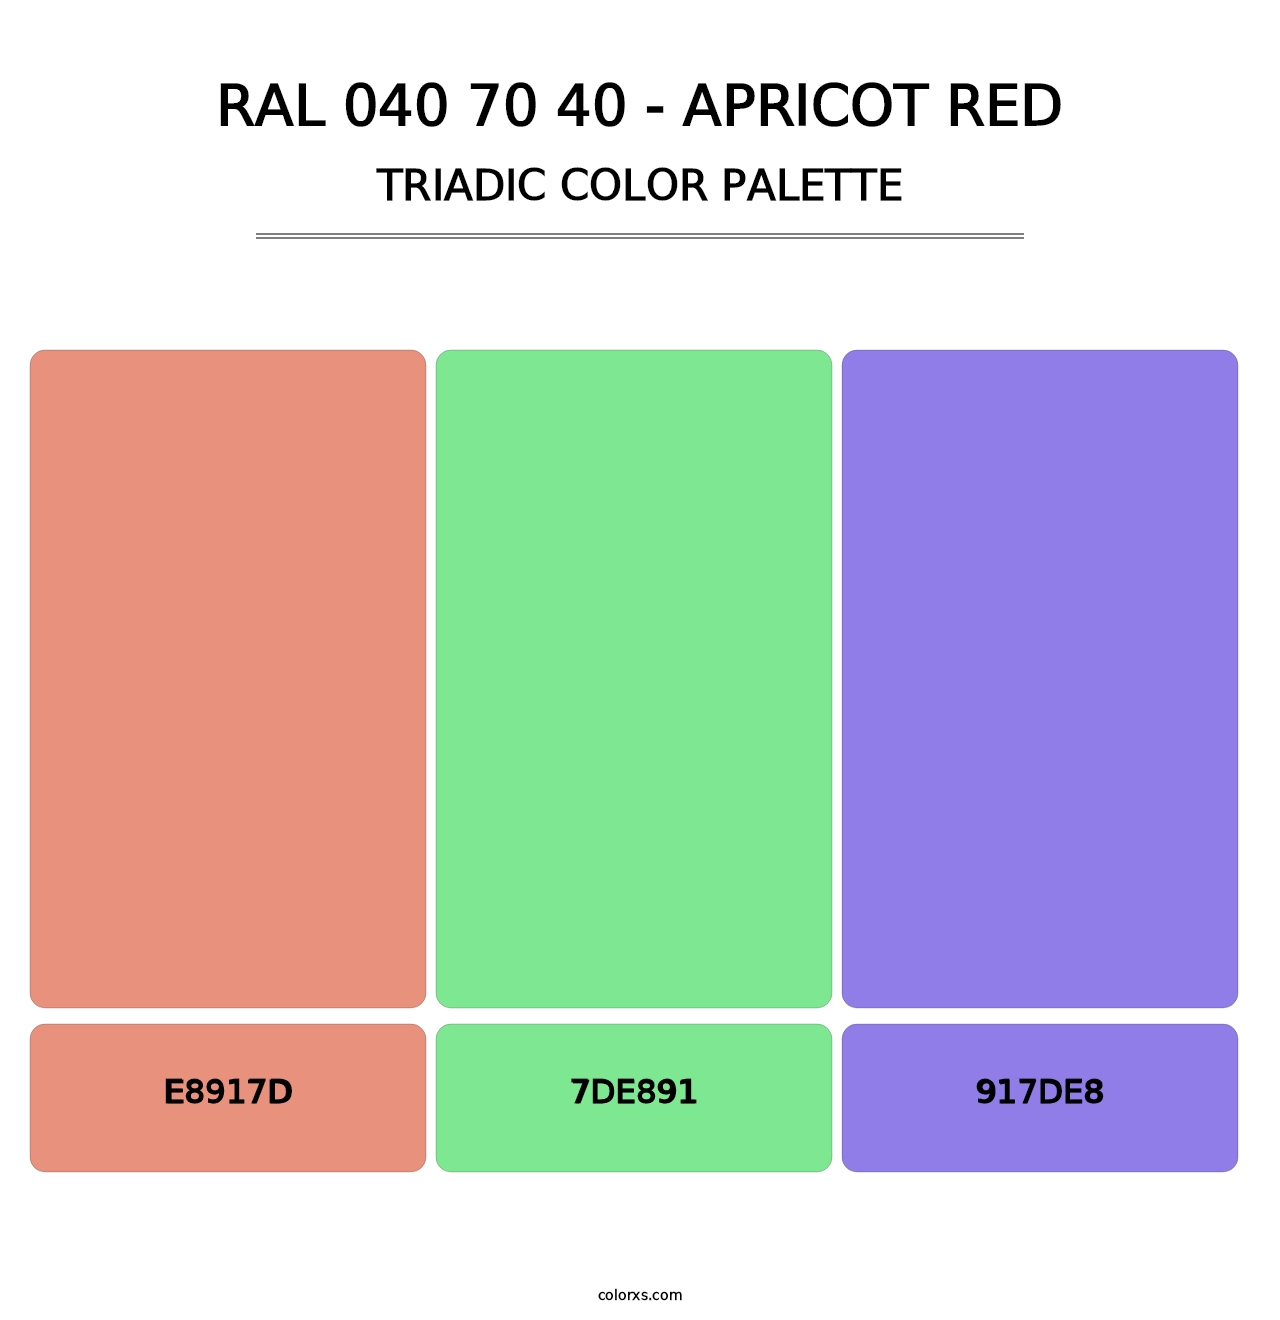 RAL 040 70 40 - Apricot Red - Triadic Color Palette